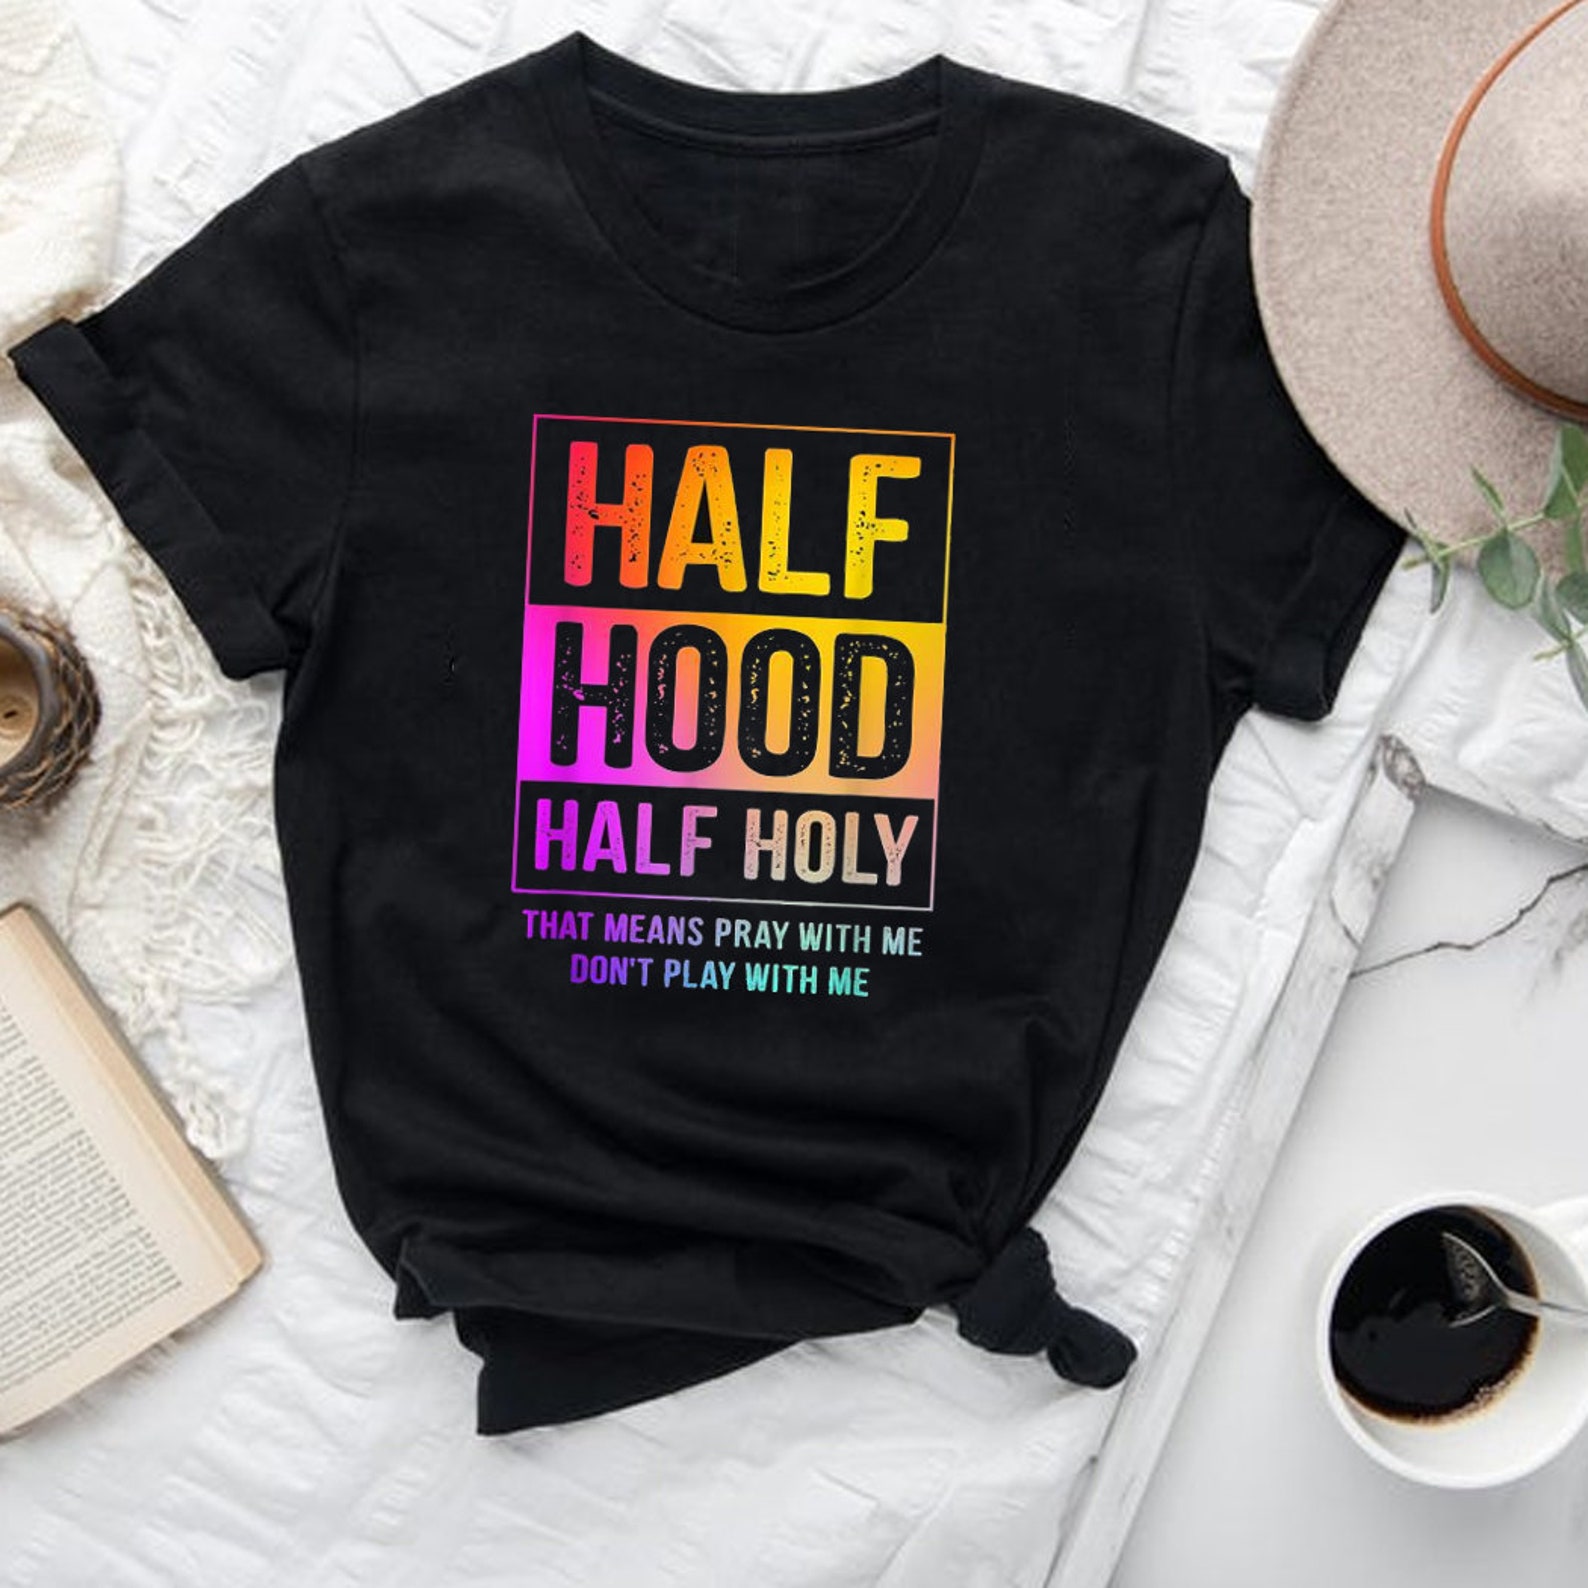 Half Hood Half Holy Shirt That Means Pray With Me Funny | Etsy